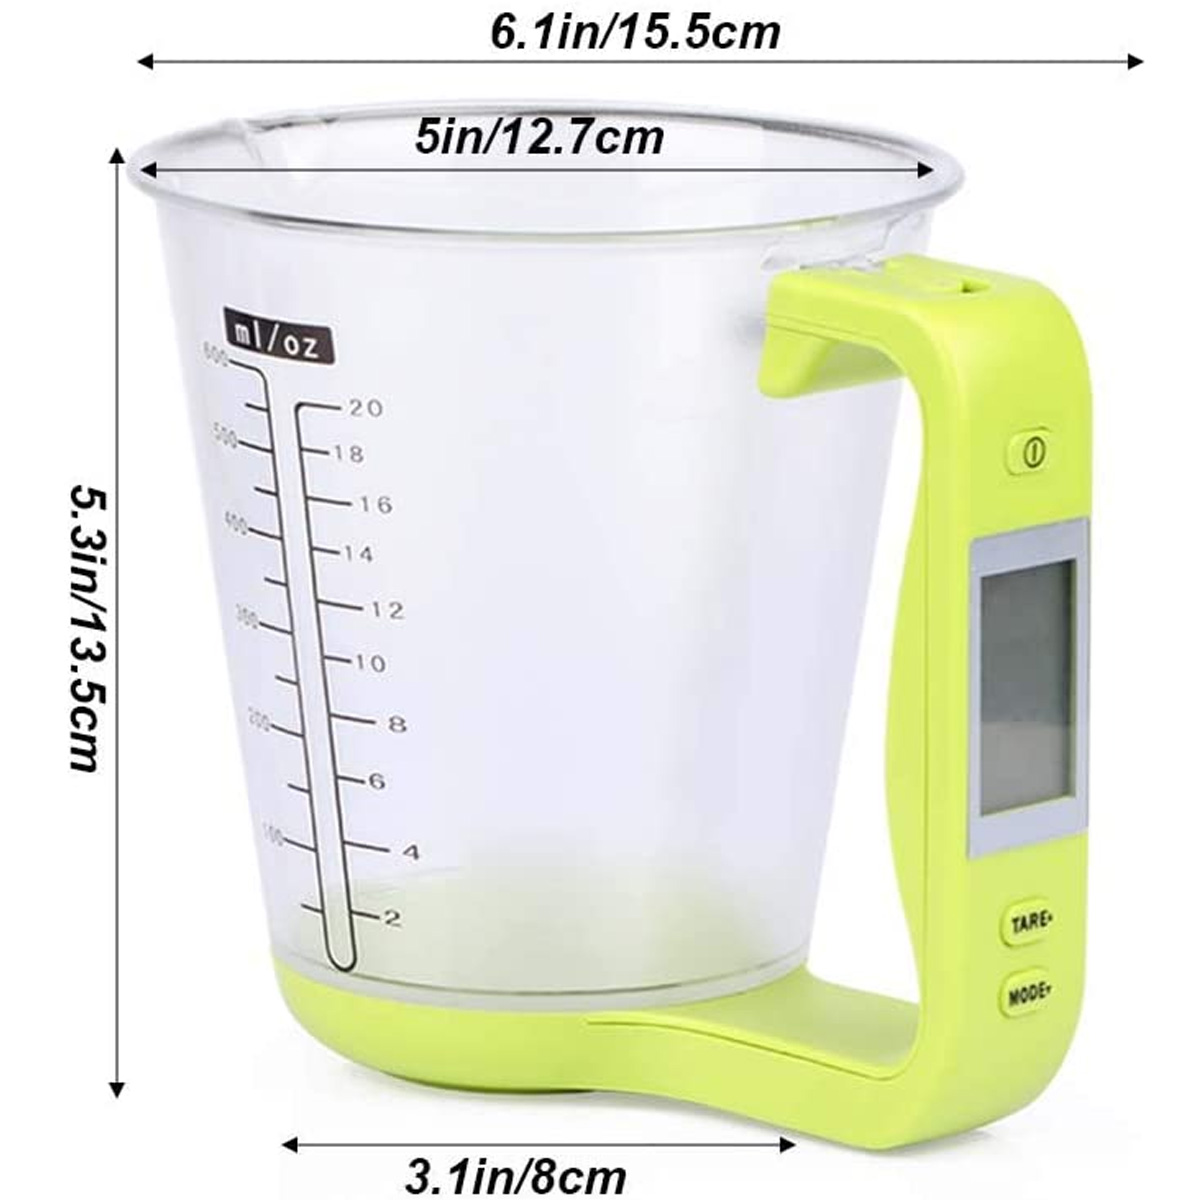 Electronic-Scale-Measuring-Cup-Auto-Power-Off-Electronic-Scale-Large-Capacity-LCD-Digital-Measuring--86136-15